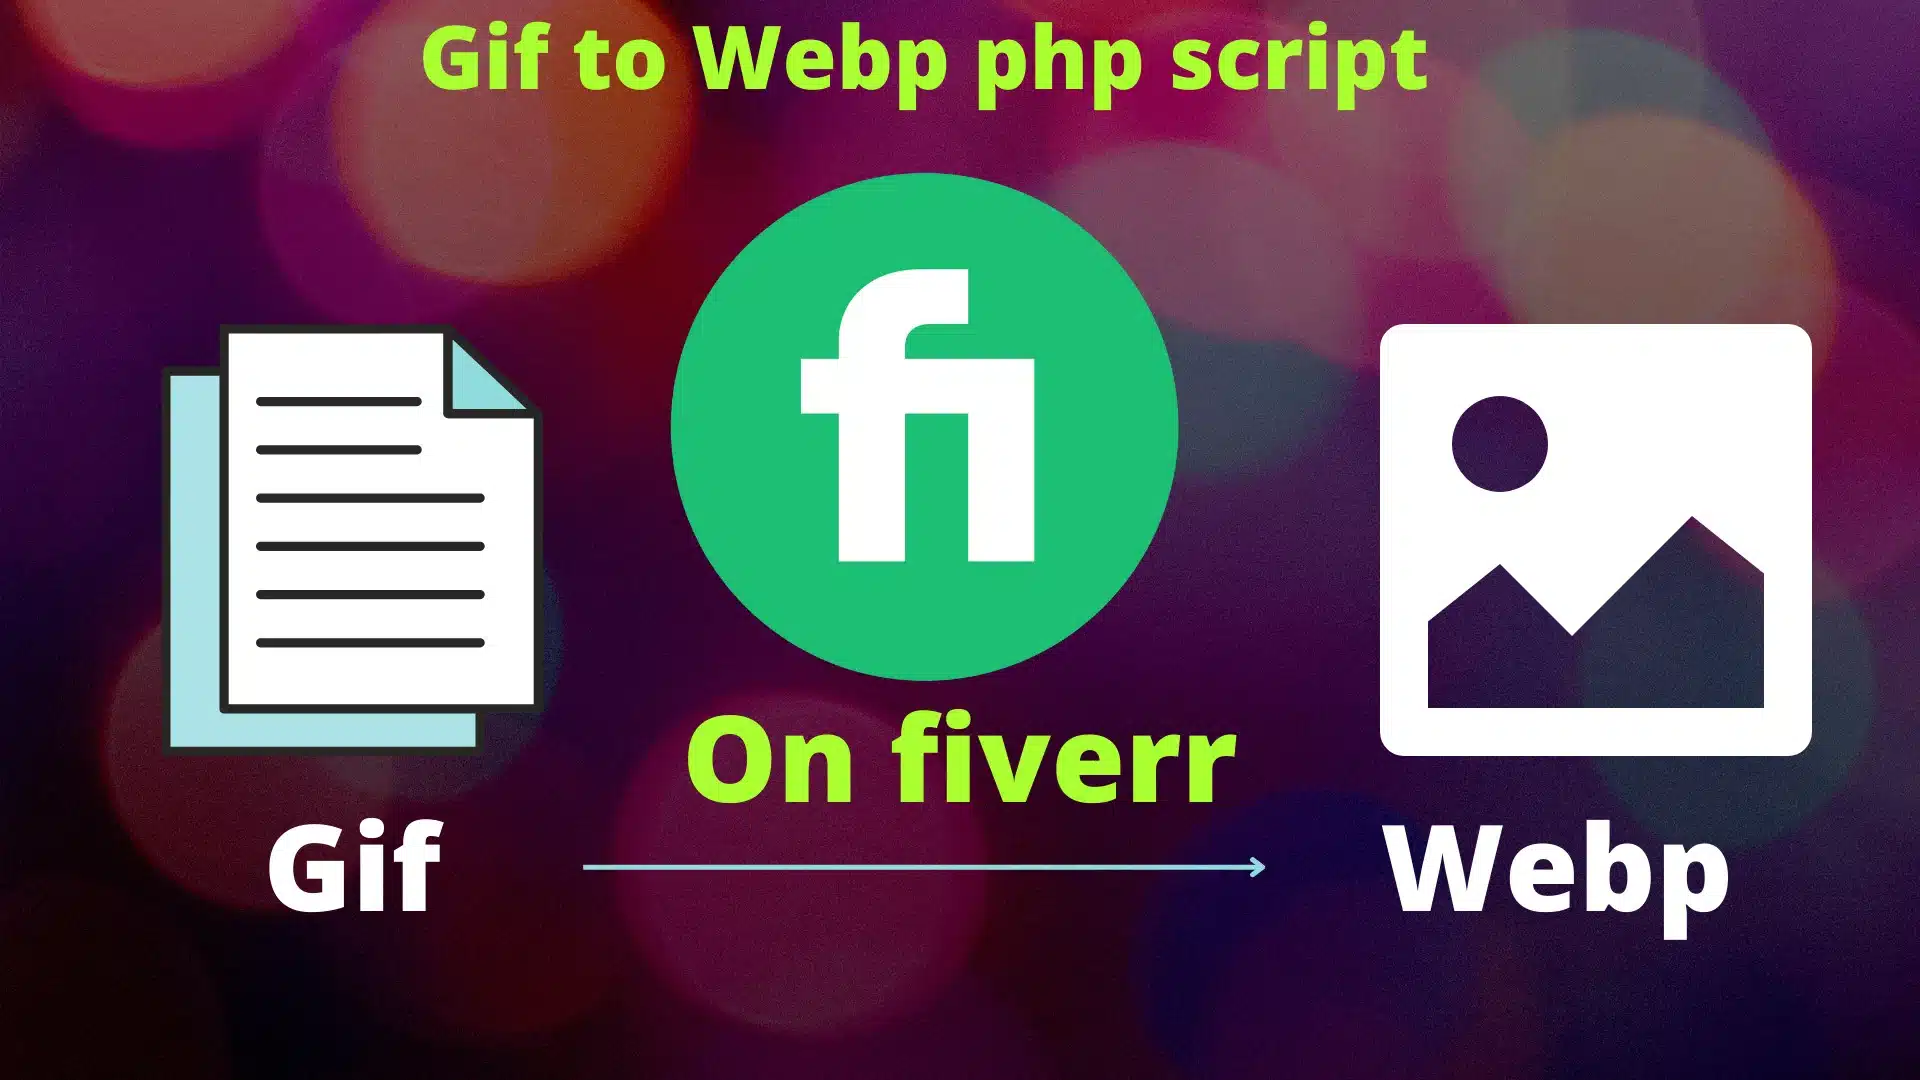 Convert GIF To WebP Image Format In PHP